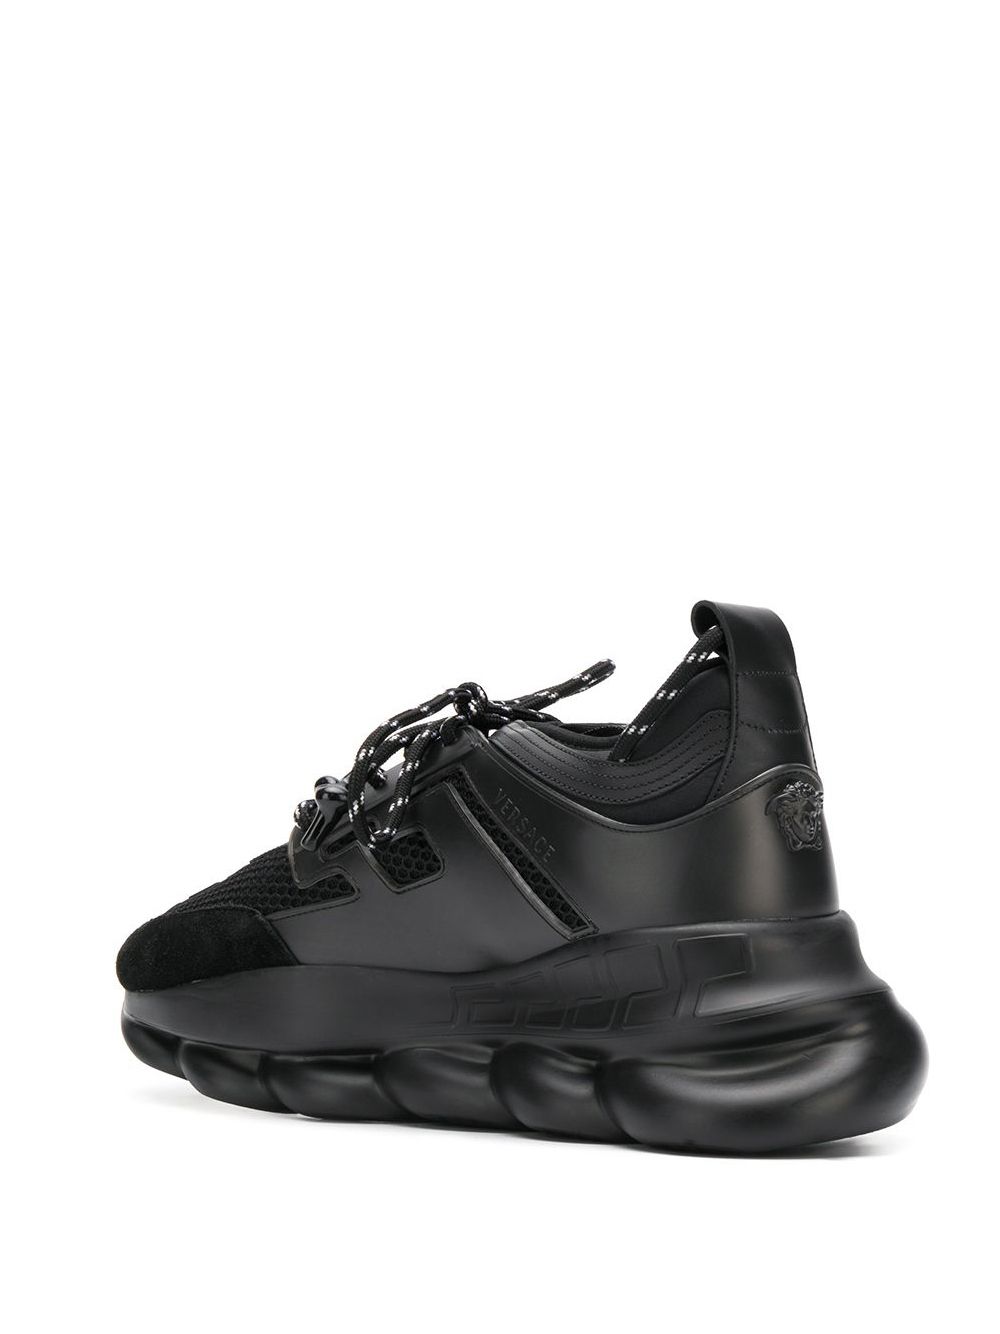 versace trainers chain reaction black